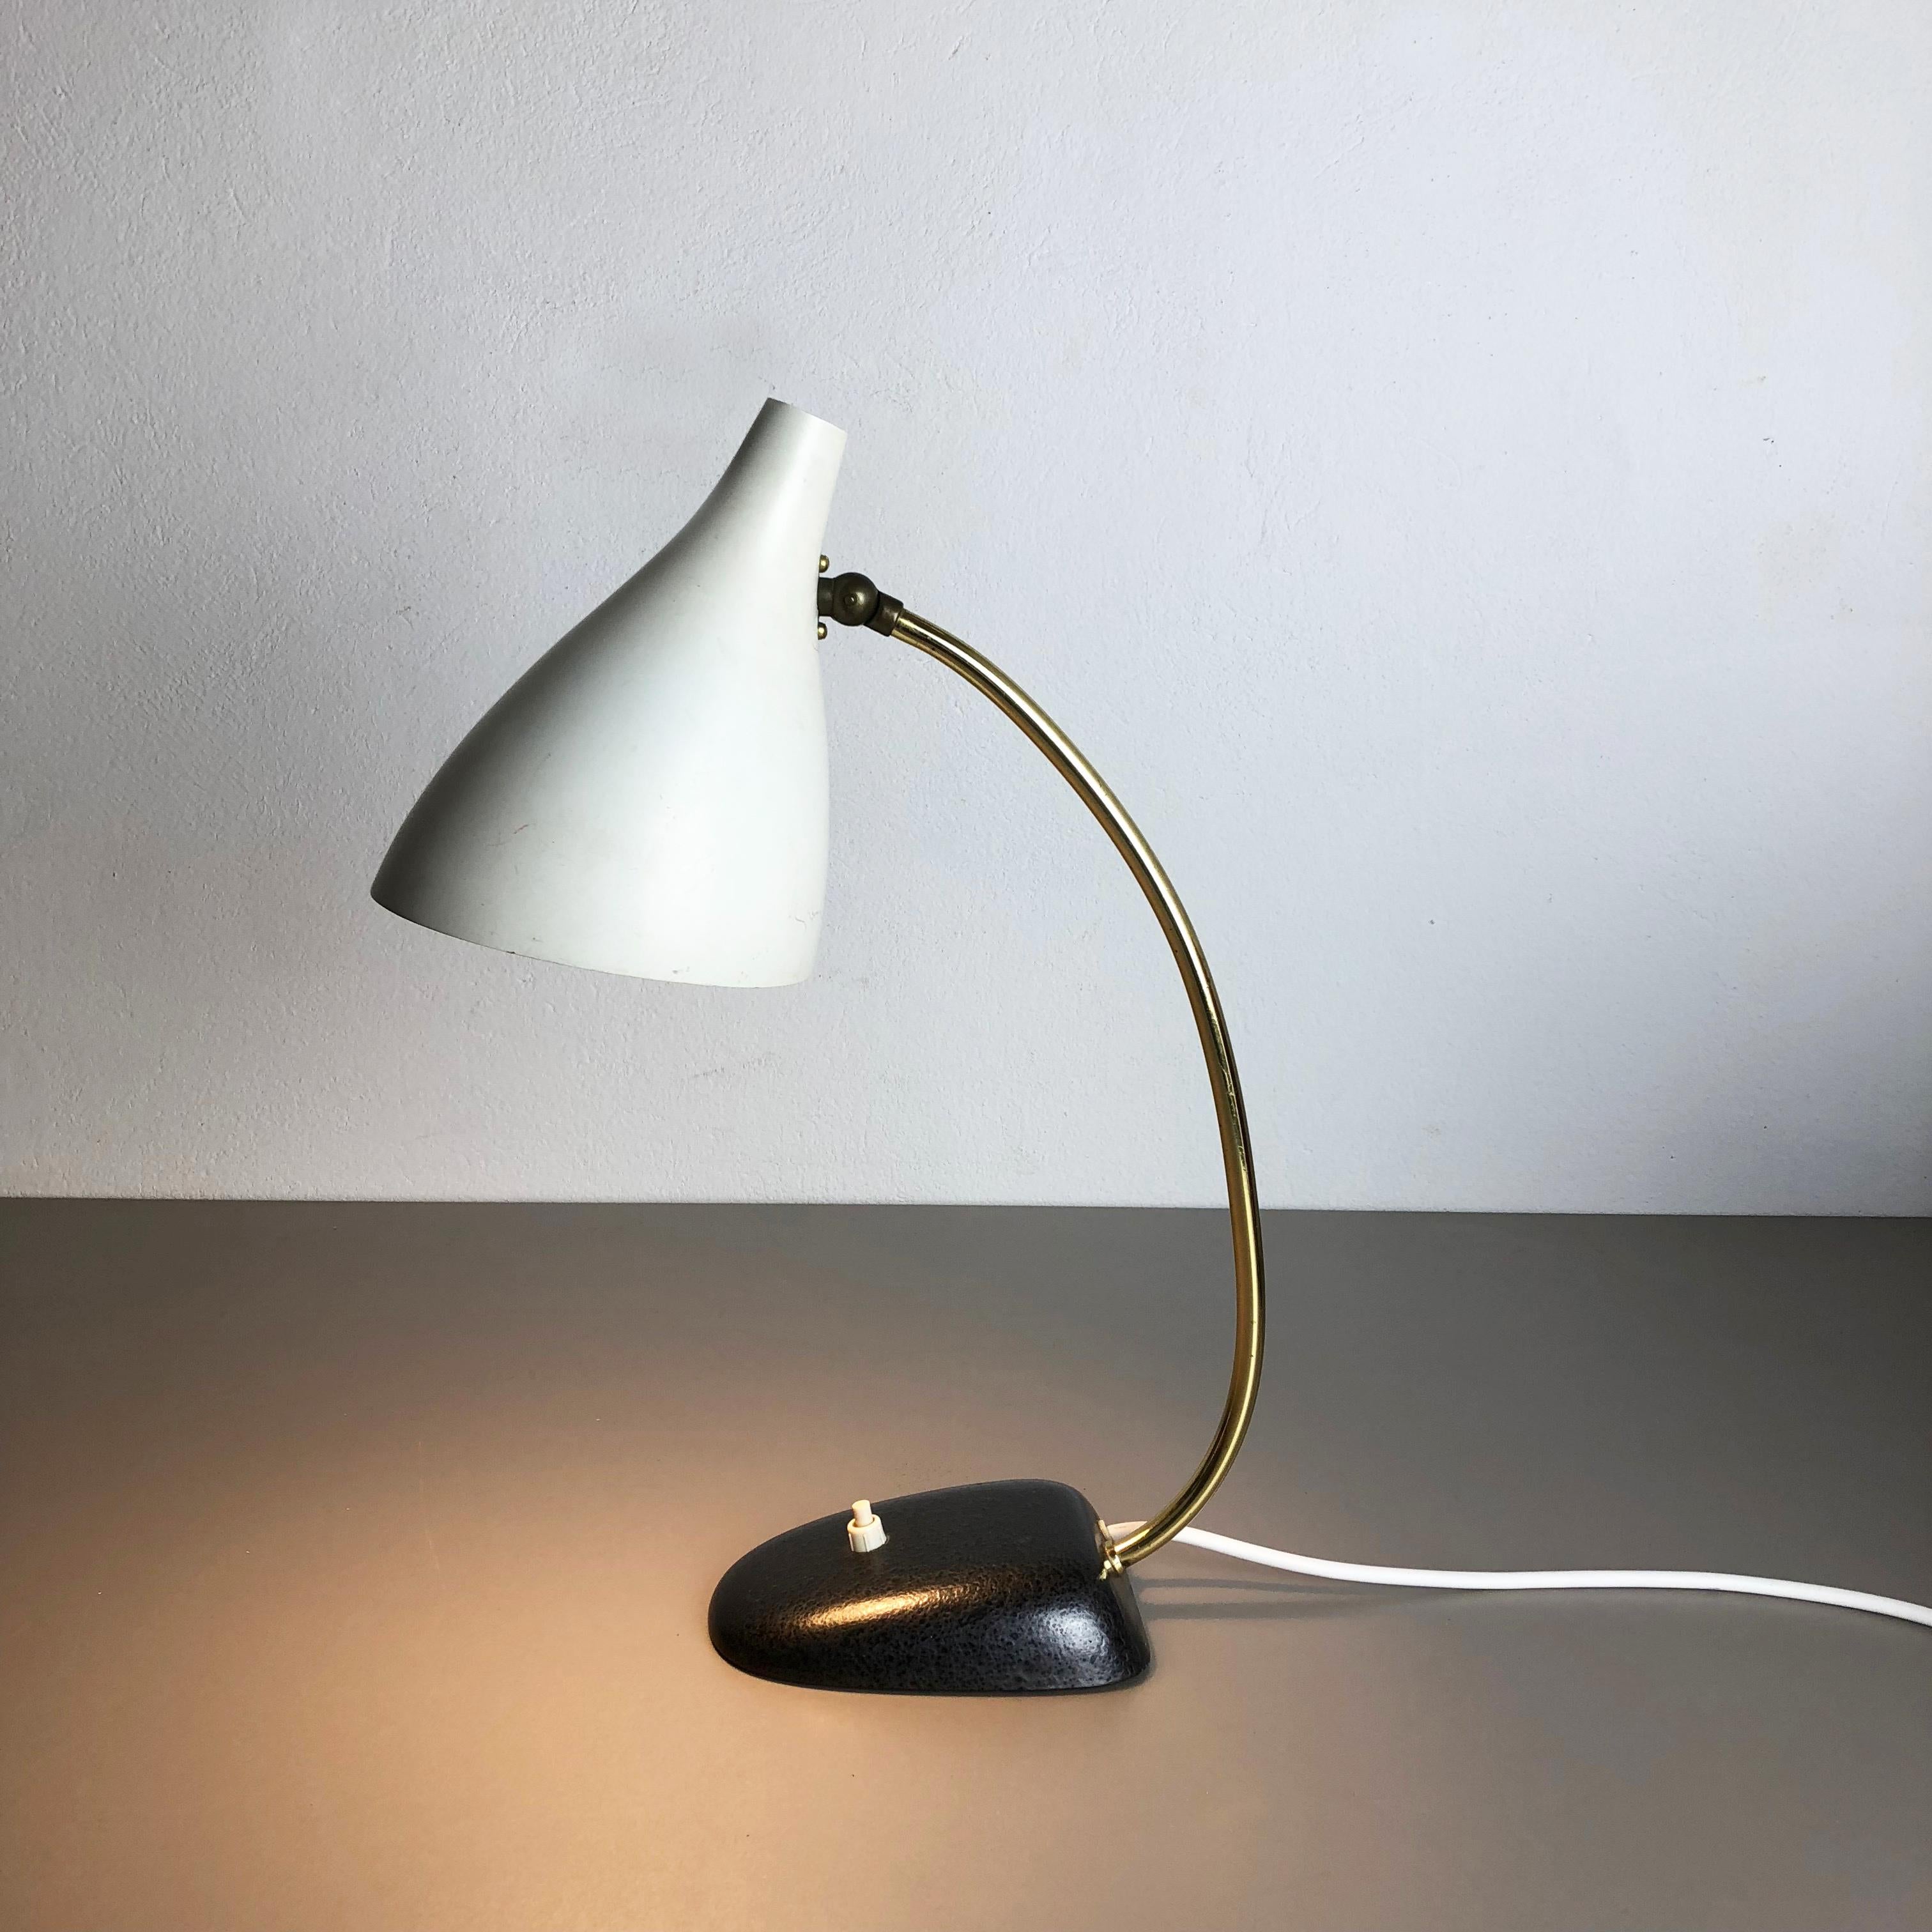 Original Modernist 1960s Metal Table Light Made by Cosack, Germany For Sale 8